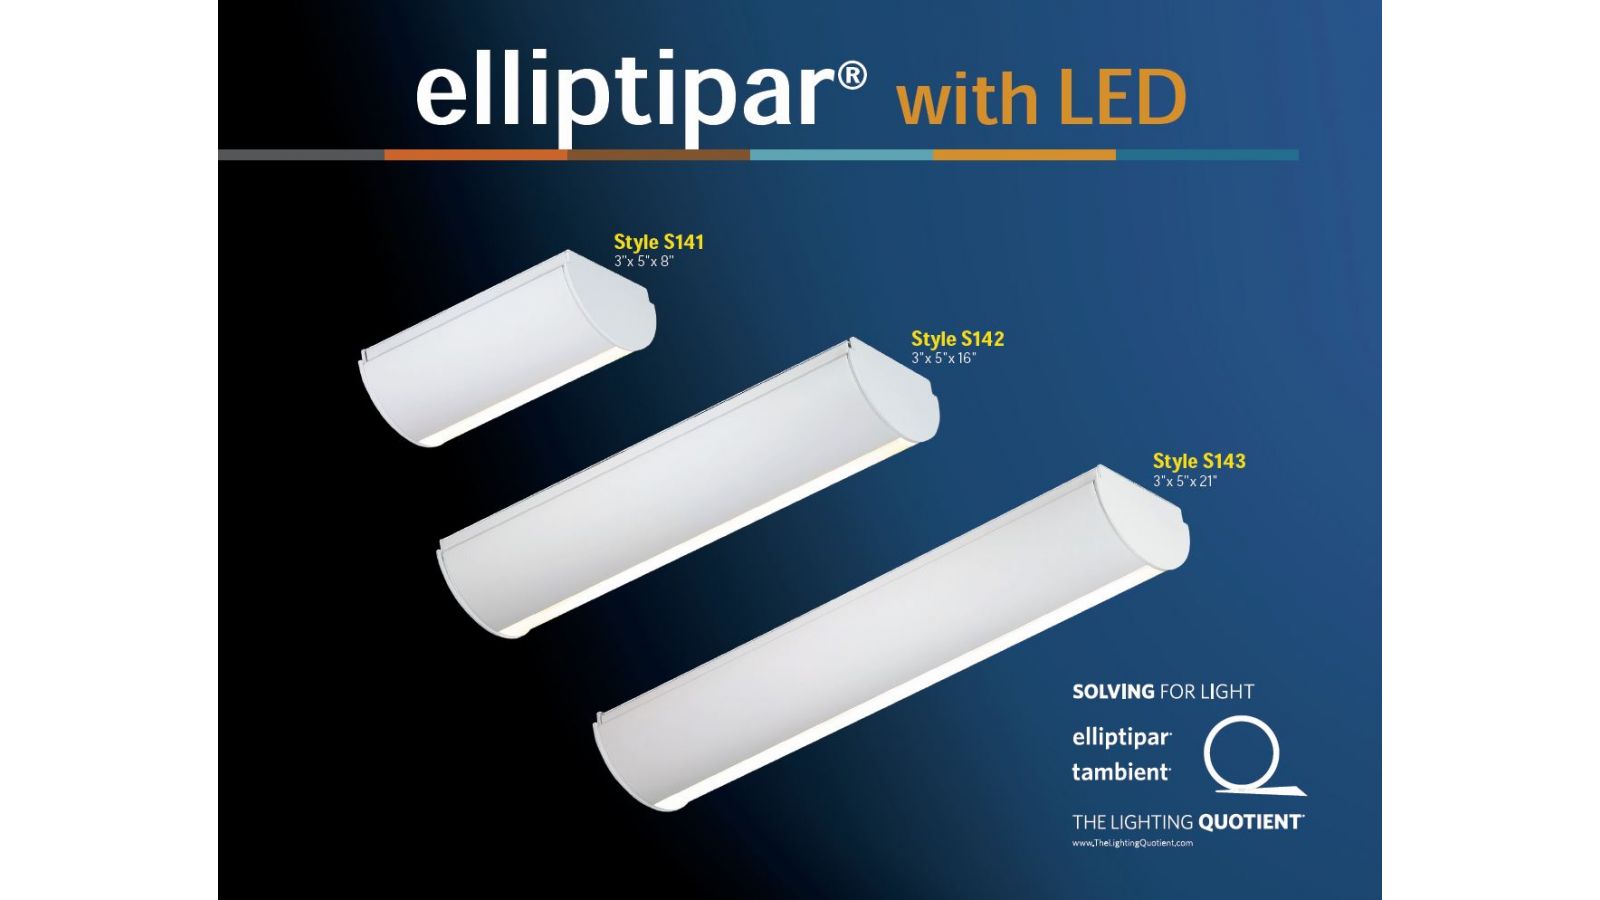 S14x LED Wall Washer Family by elliptipar